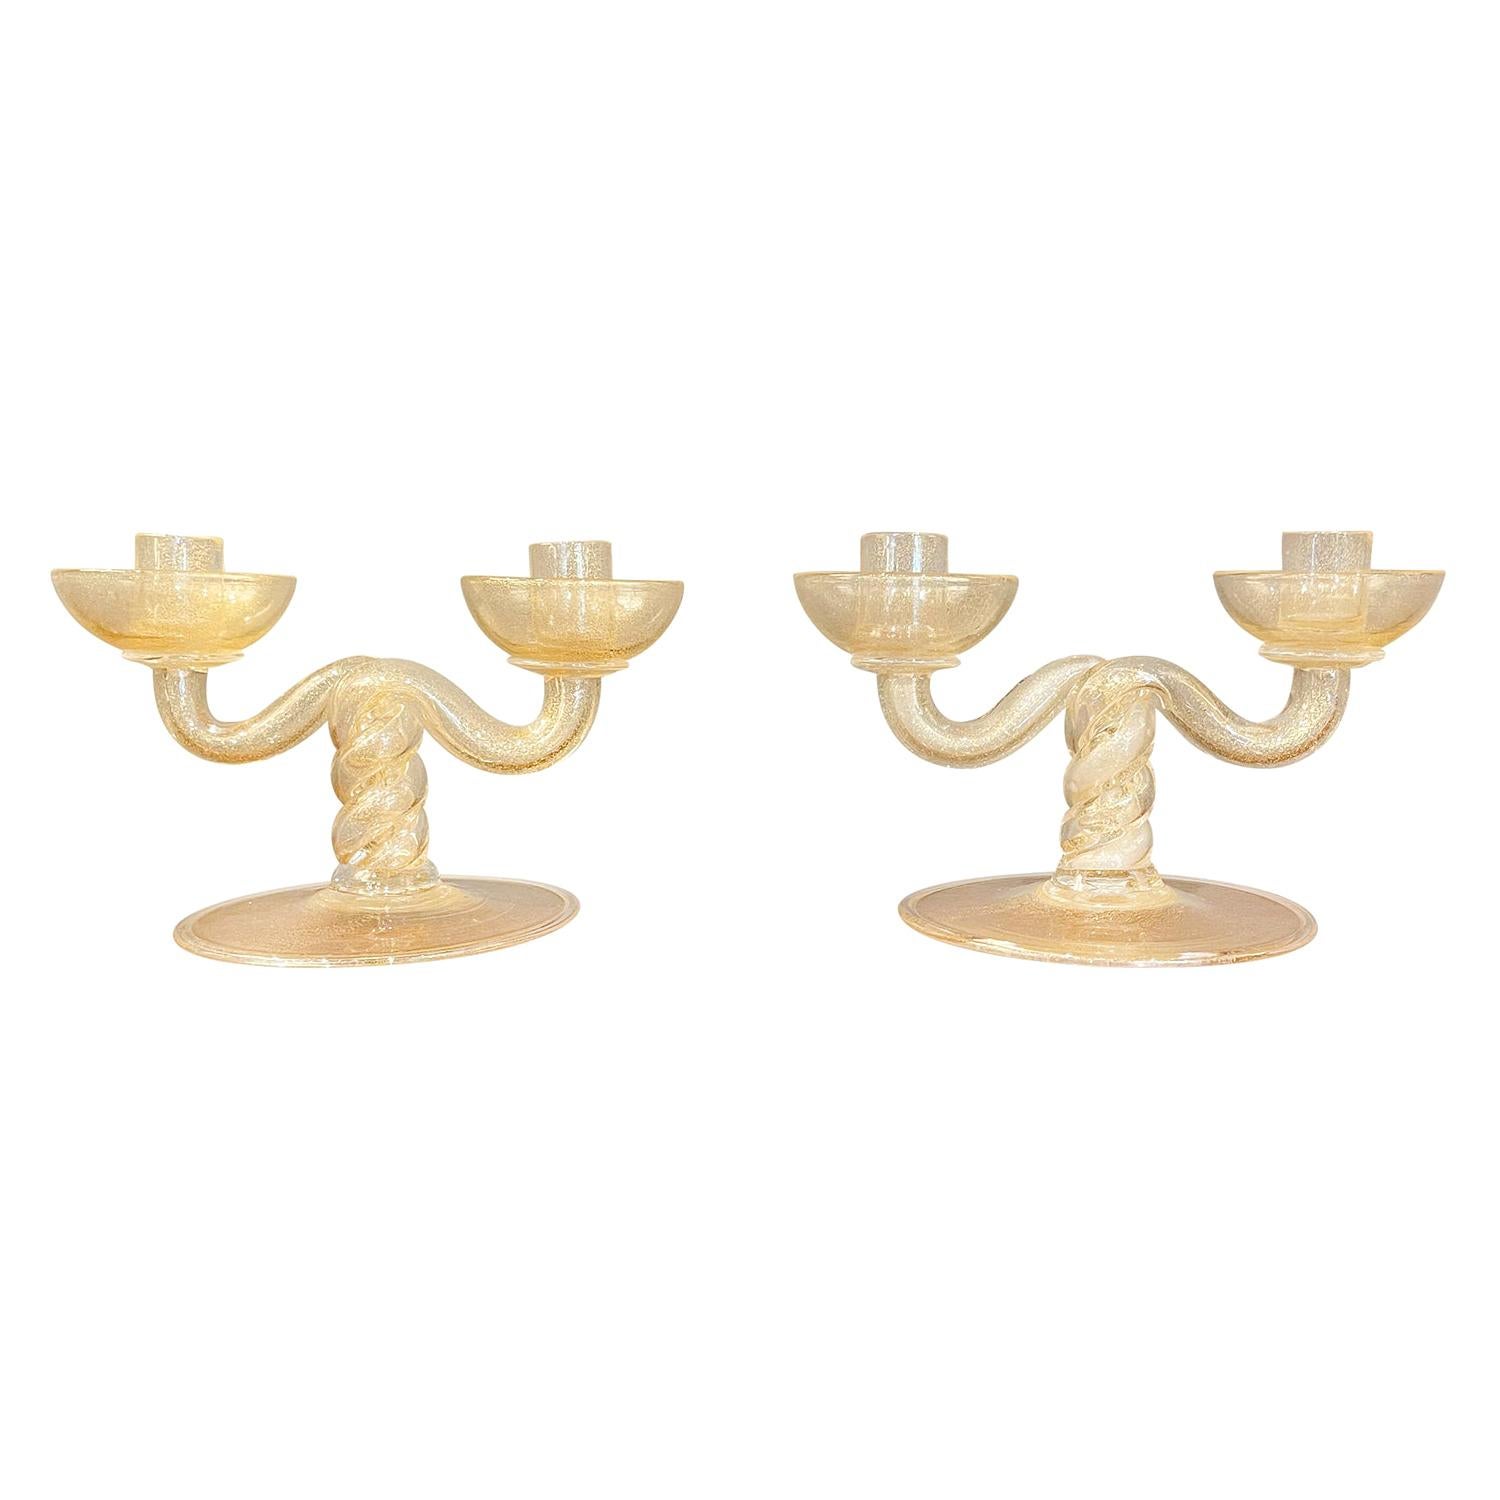 20th Century Italian Pair of Murano Glass Candle Holders by Barovier & Toso For Sale